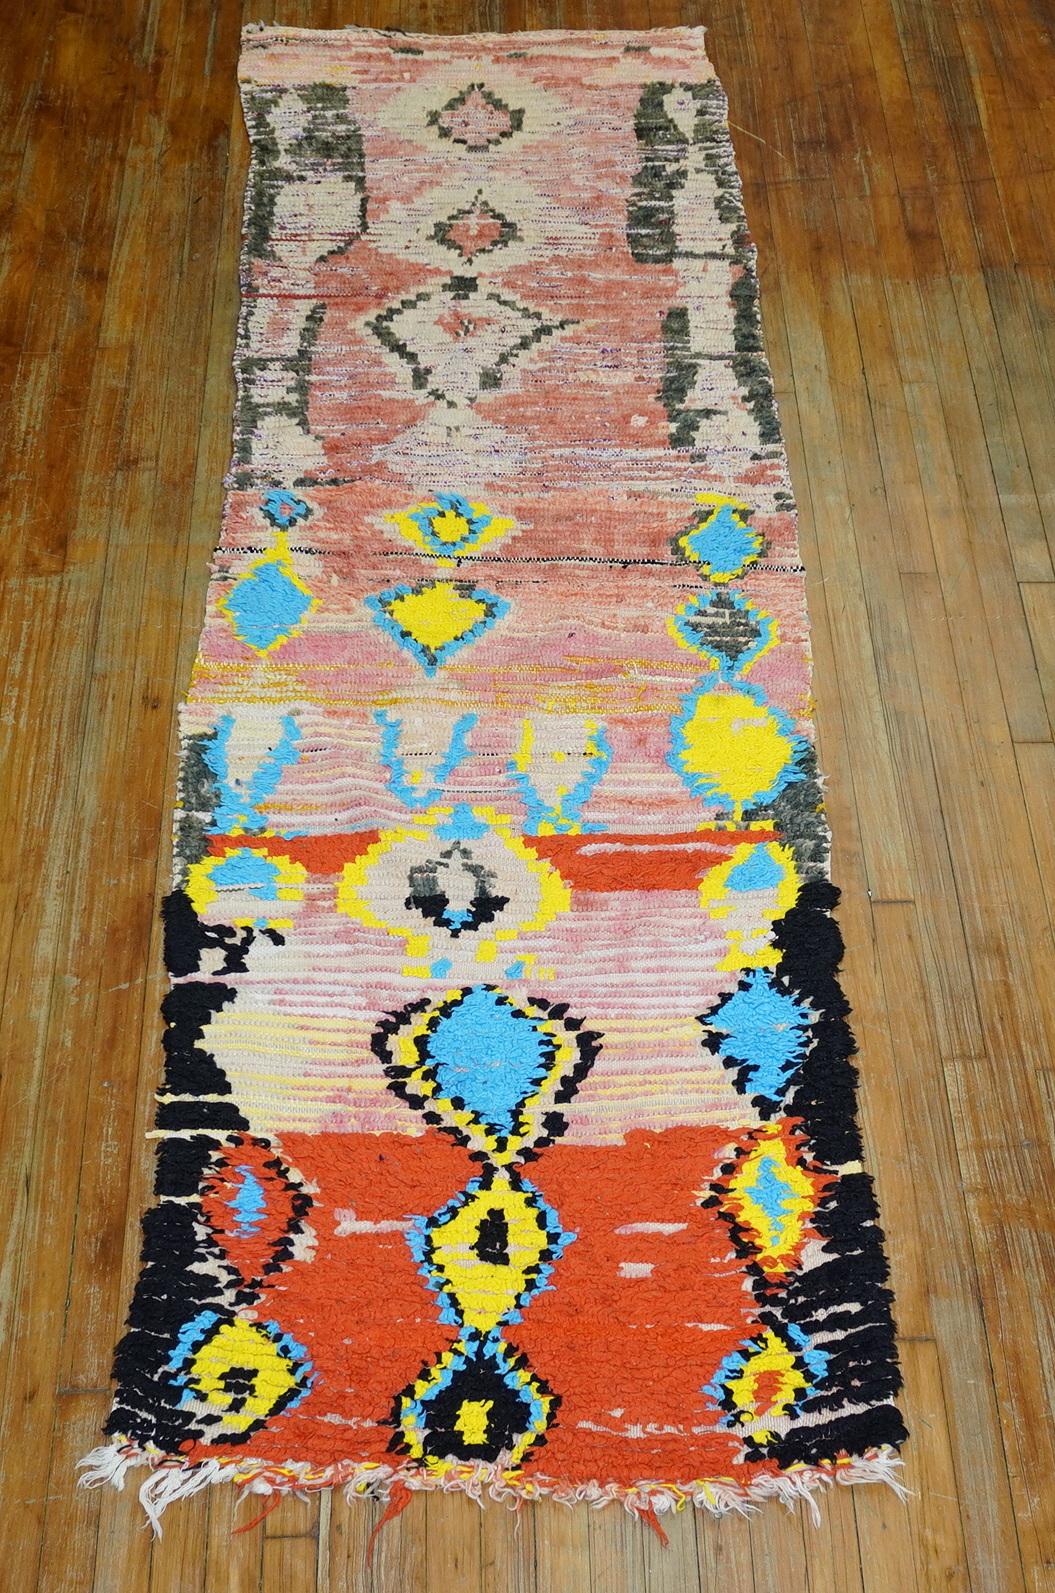 Rare handmade wool one of a kind Authentic Moroccan runner from the middle of the 20th century. The colors and design vary from one end and the other end. This piece is pretty wild and fun. If you are in love take a dive and make a big